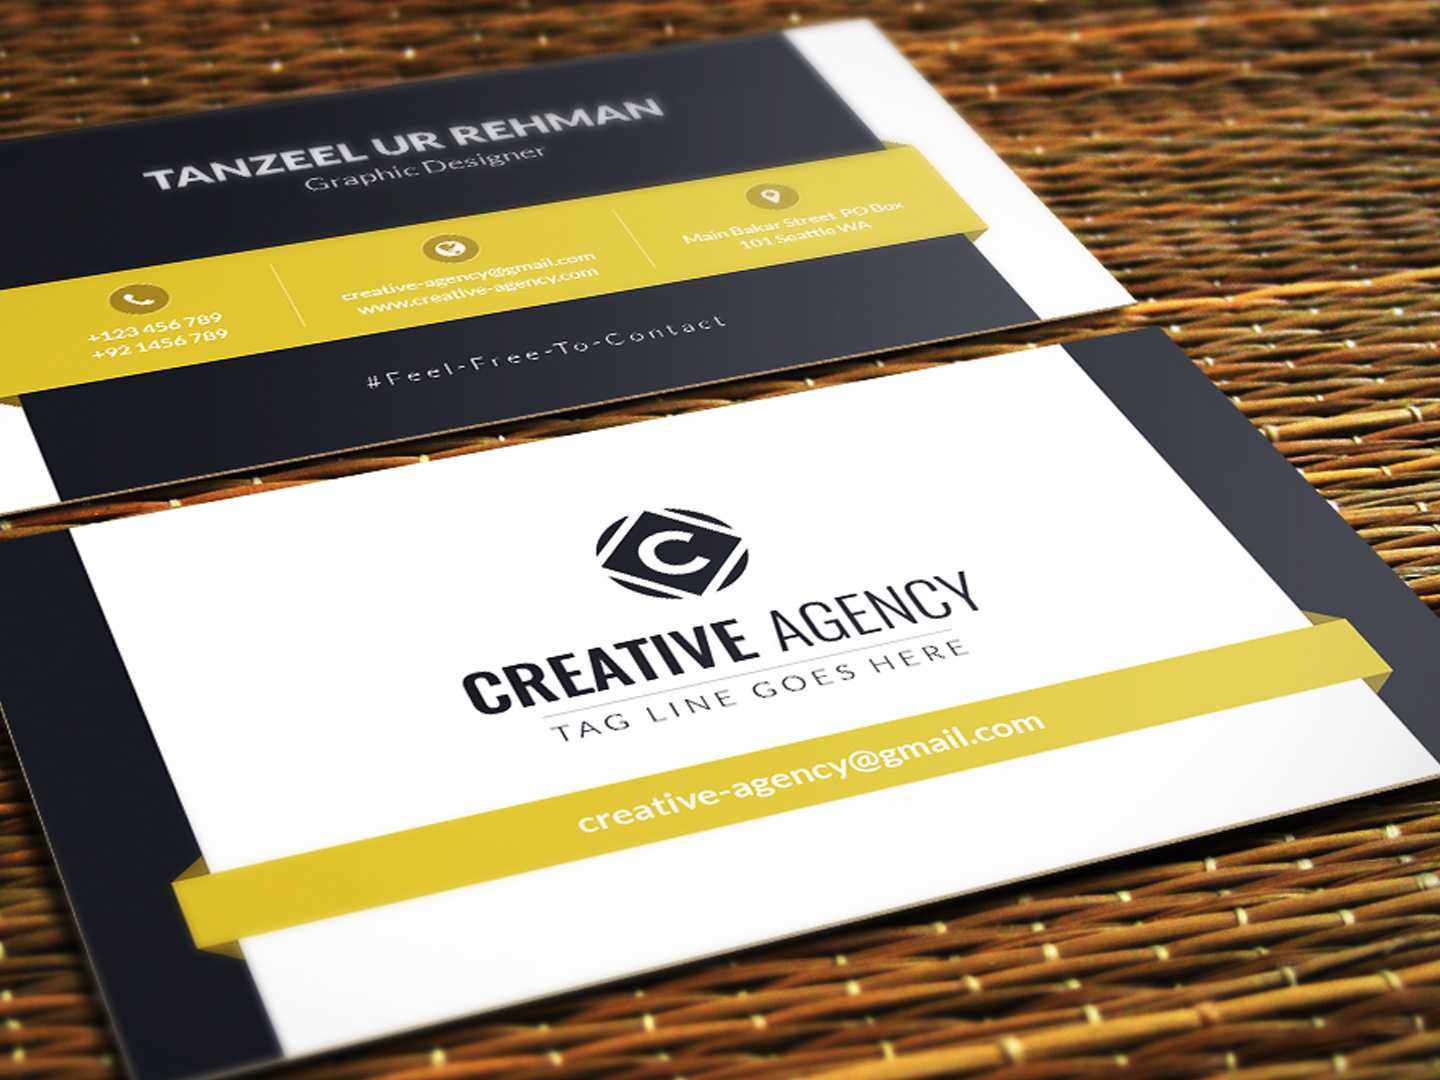 Business Cards Template – Free Downloadtanzeel Ur Rehman Pertaining To Templates For Visiting Cards Free Downloads